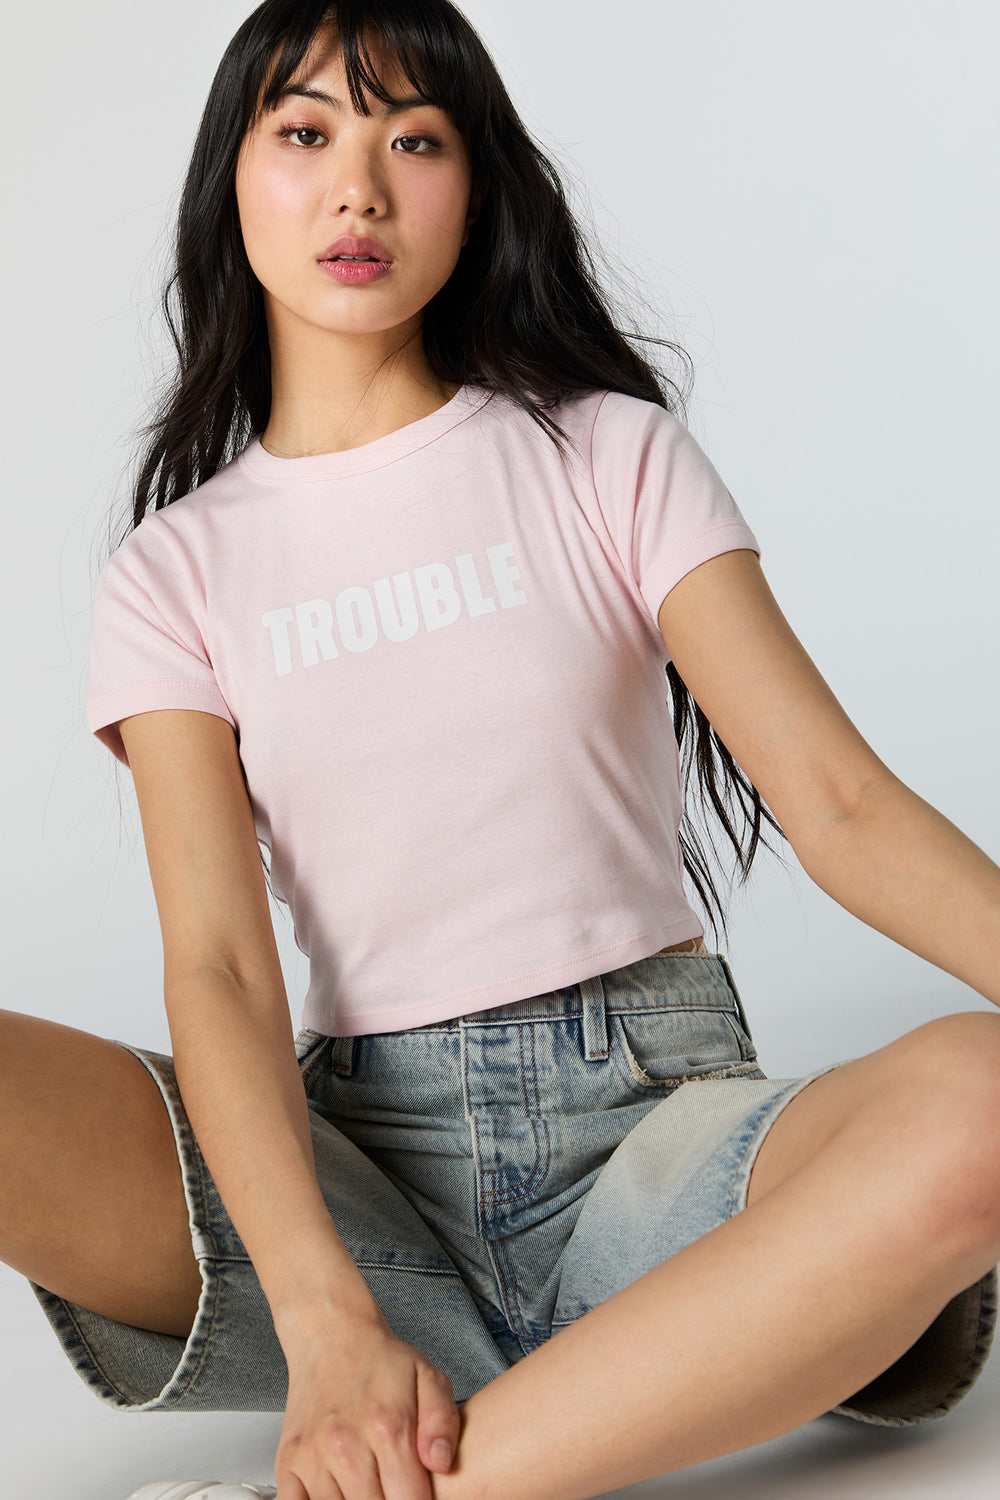 Trouble Graphic Baby T-Shirt Trouble Graphic Baby T-Shirt 1